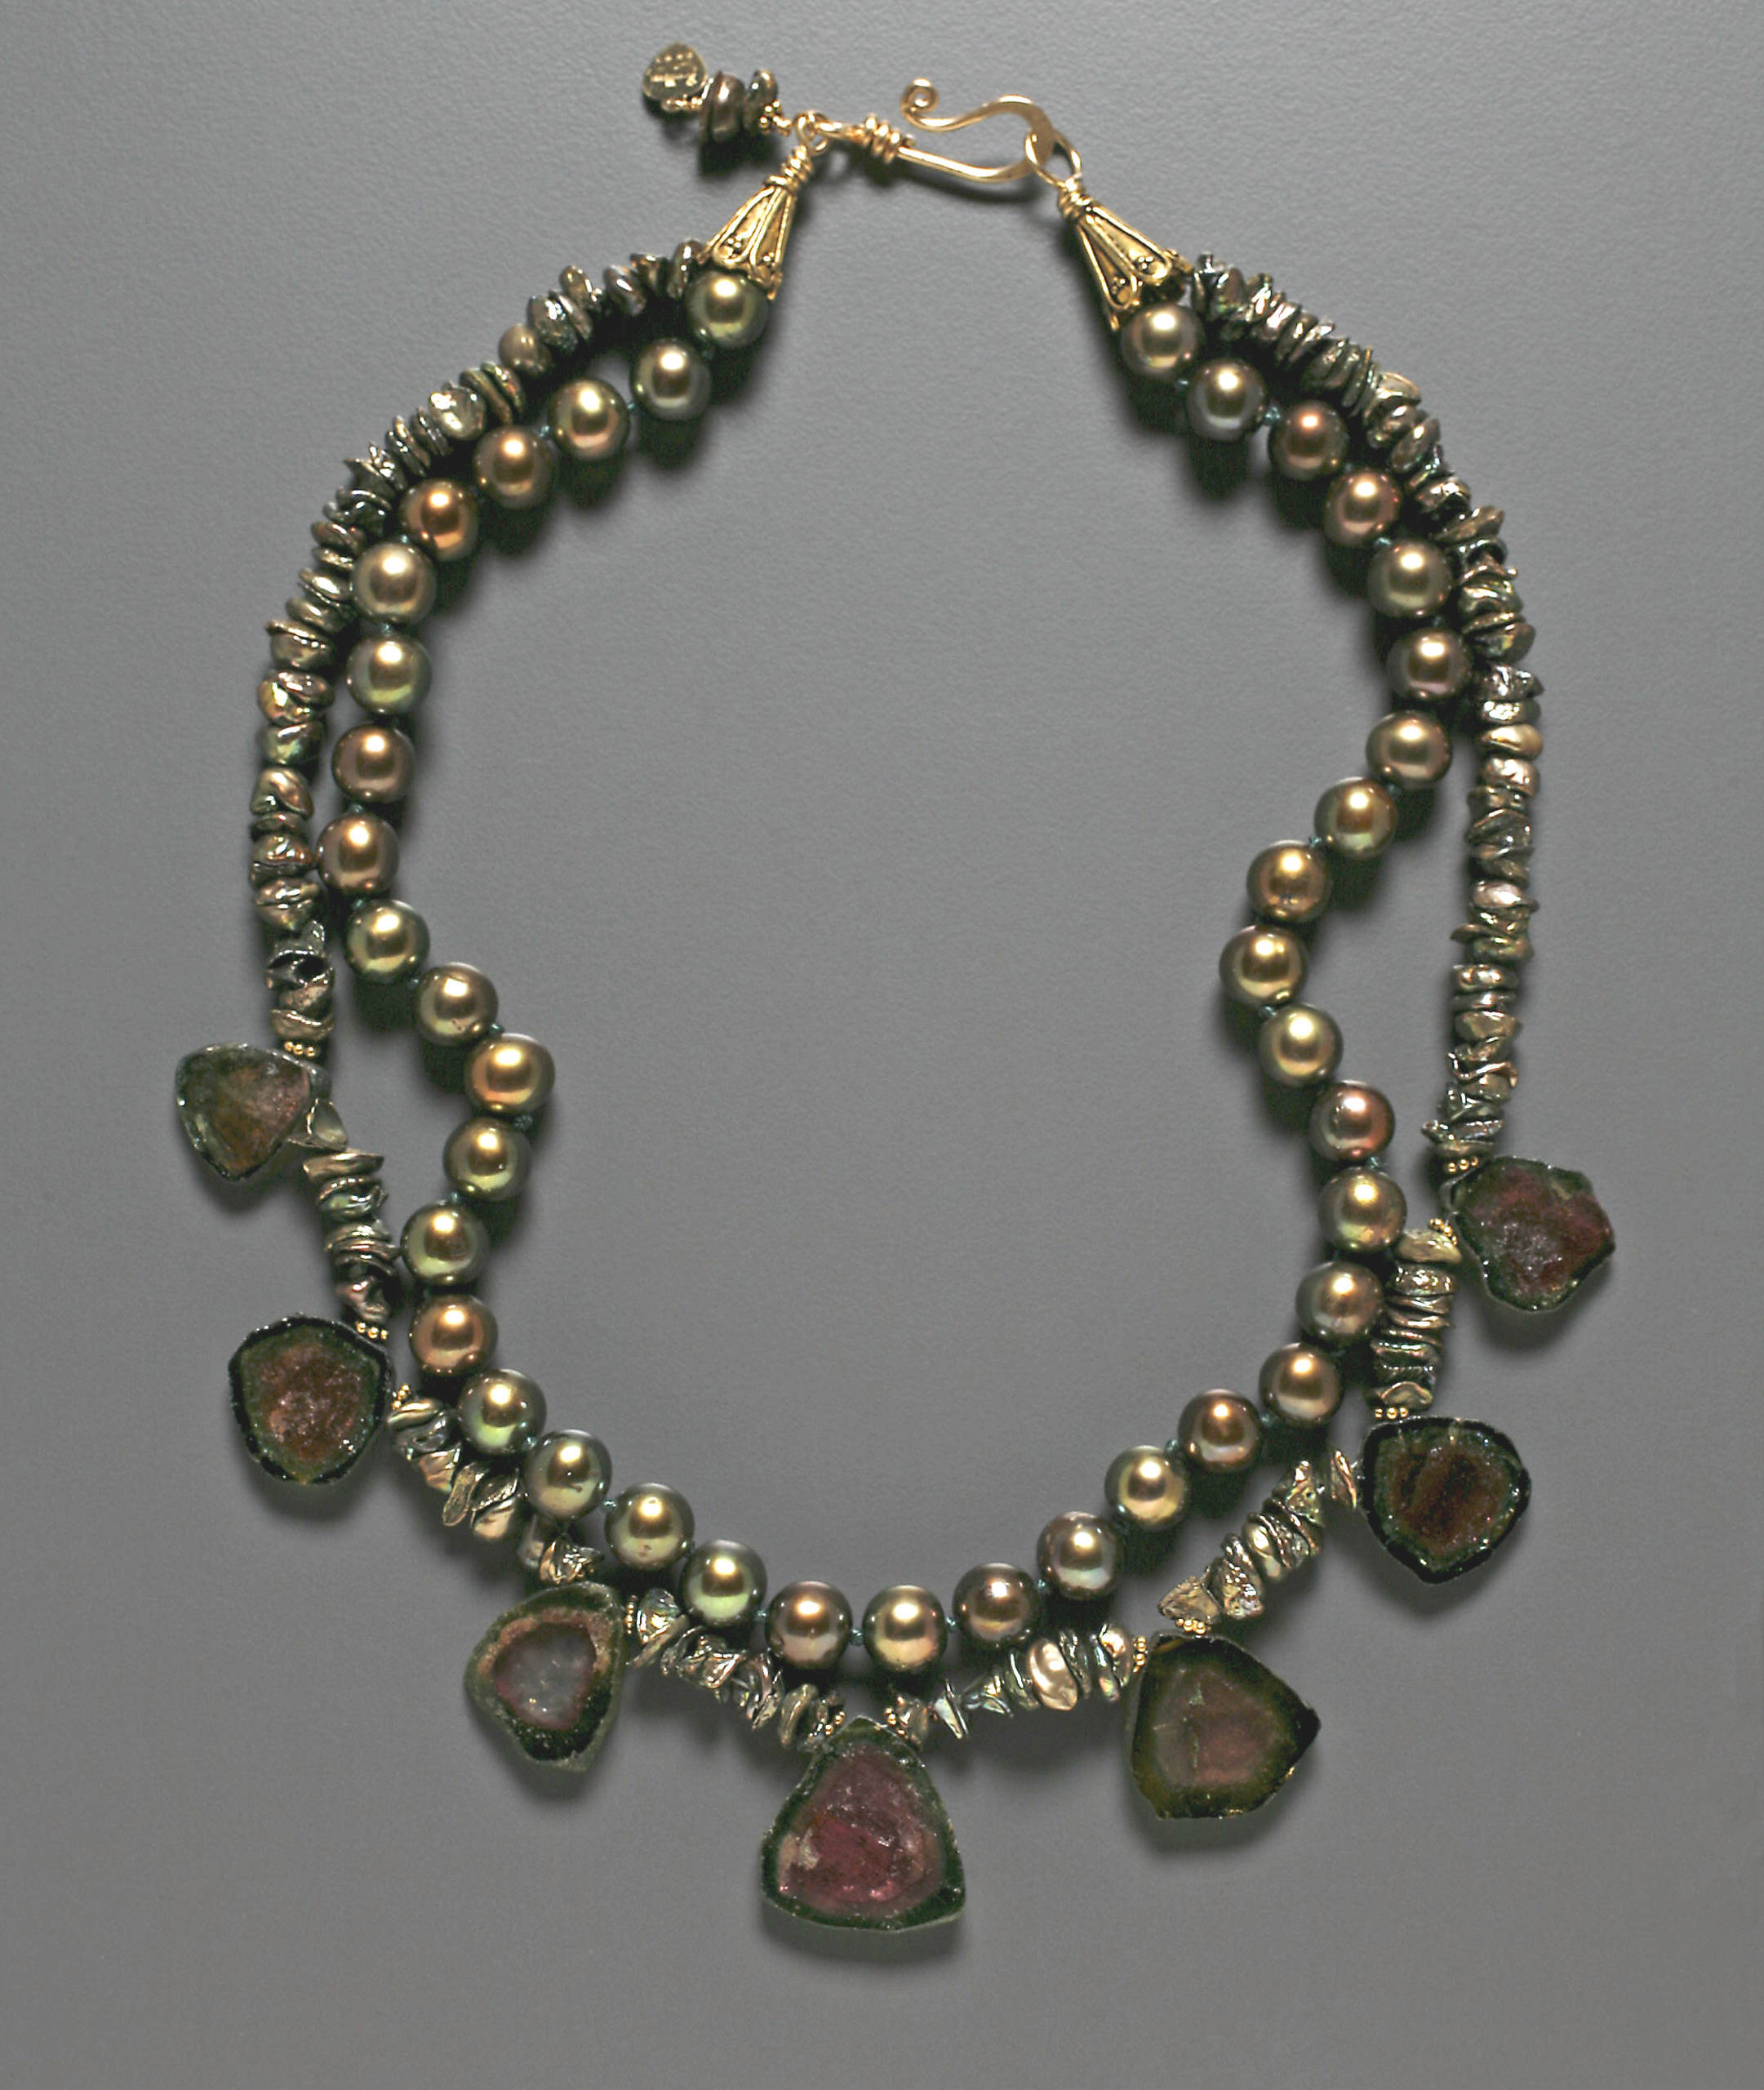 Detail of Tourmaline and Pearls Necklace